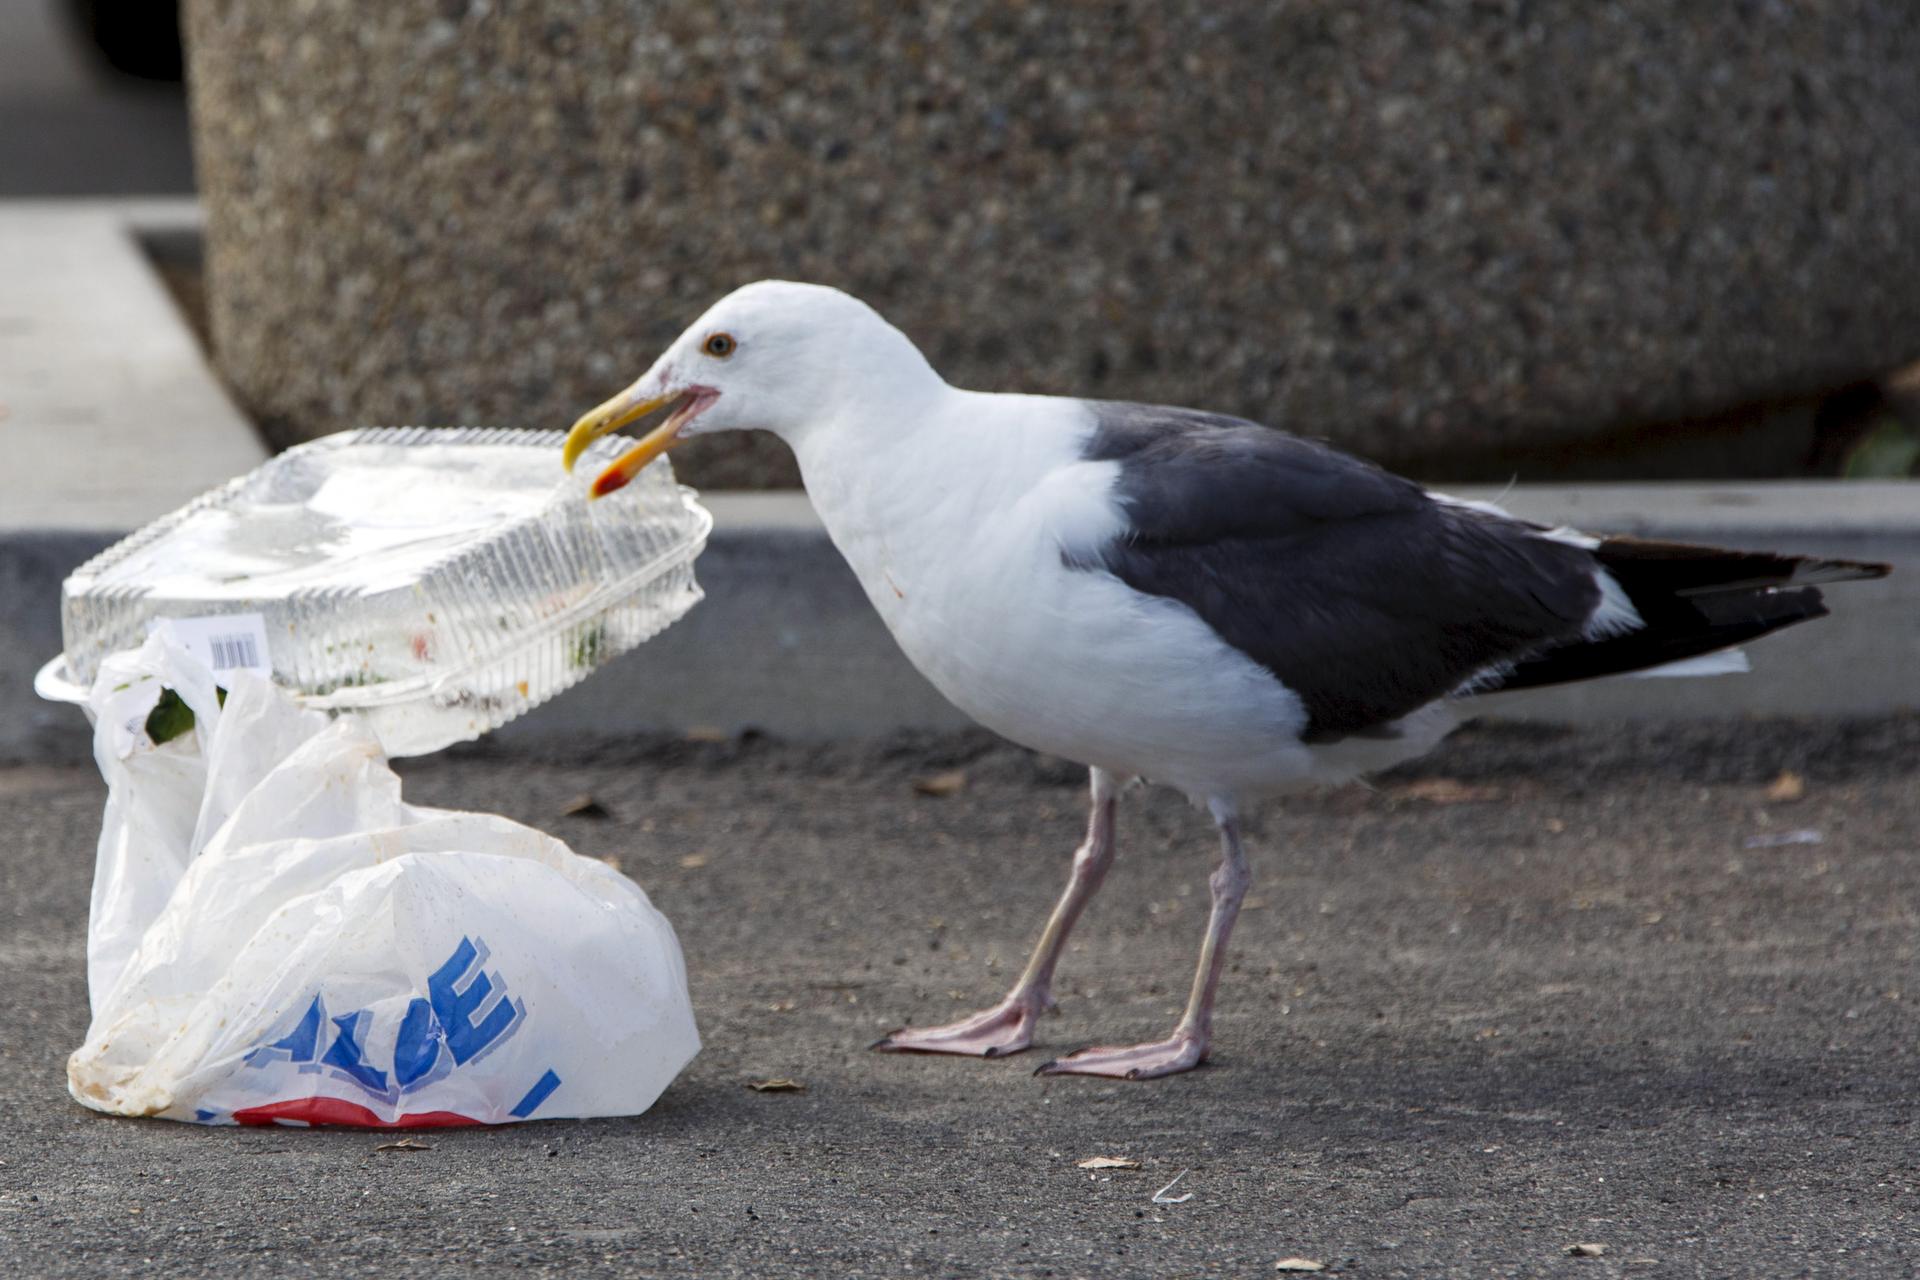 A seagull picks up a plastic container next to a plastic bag.